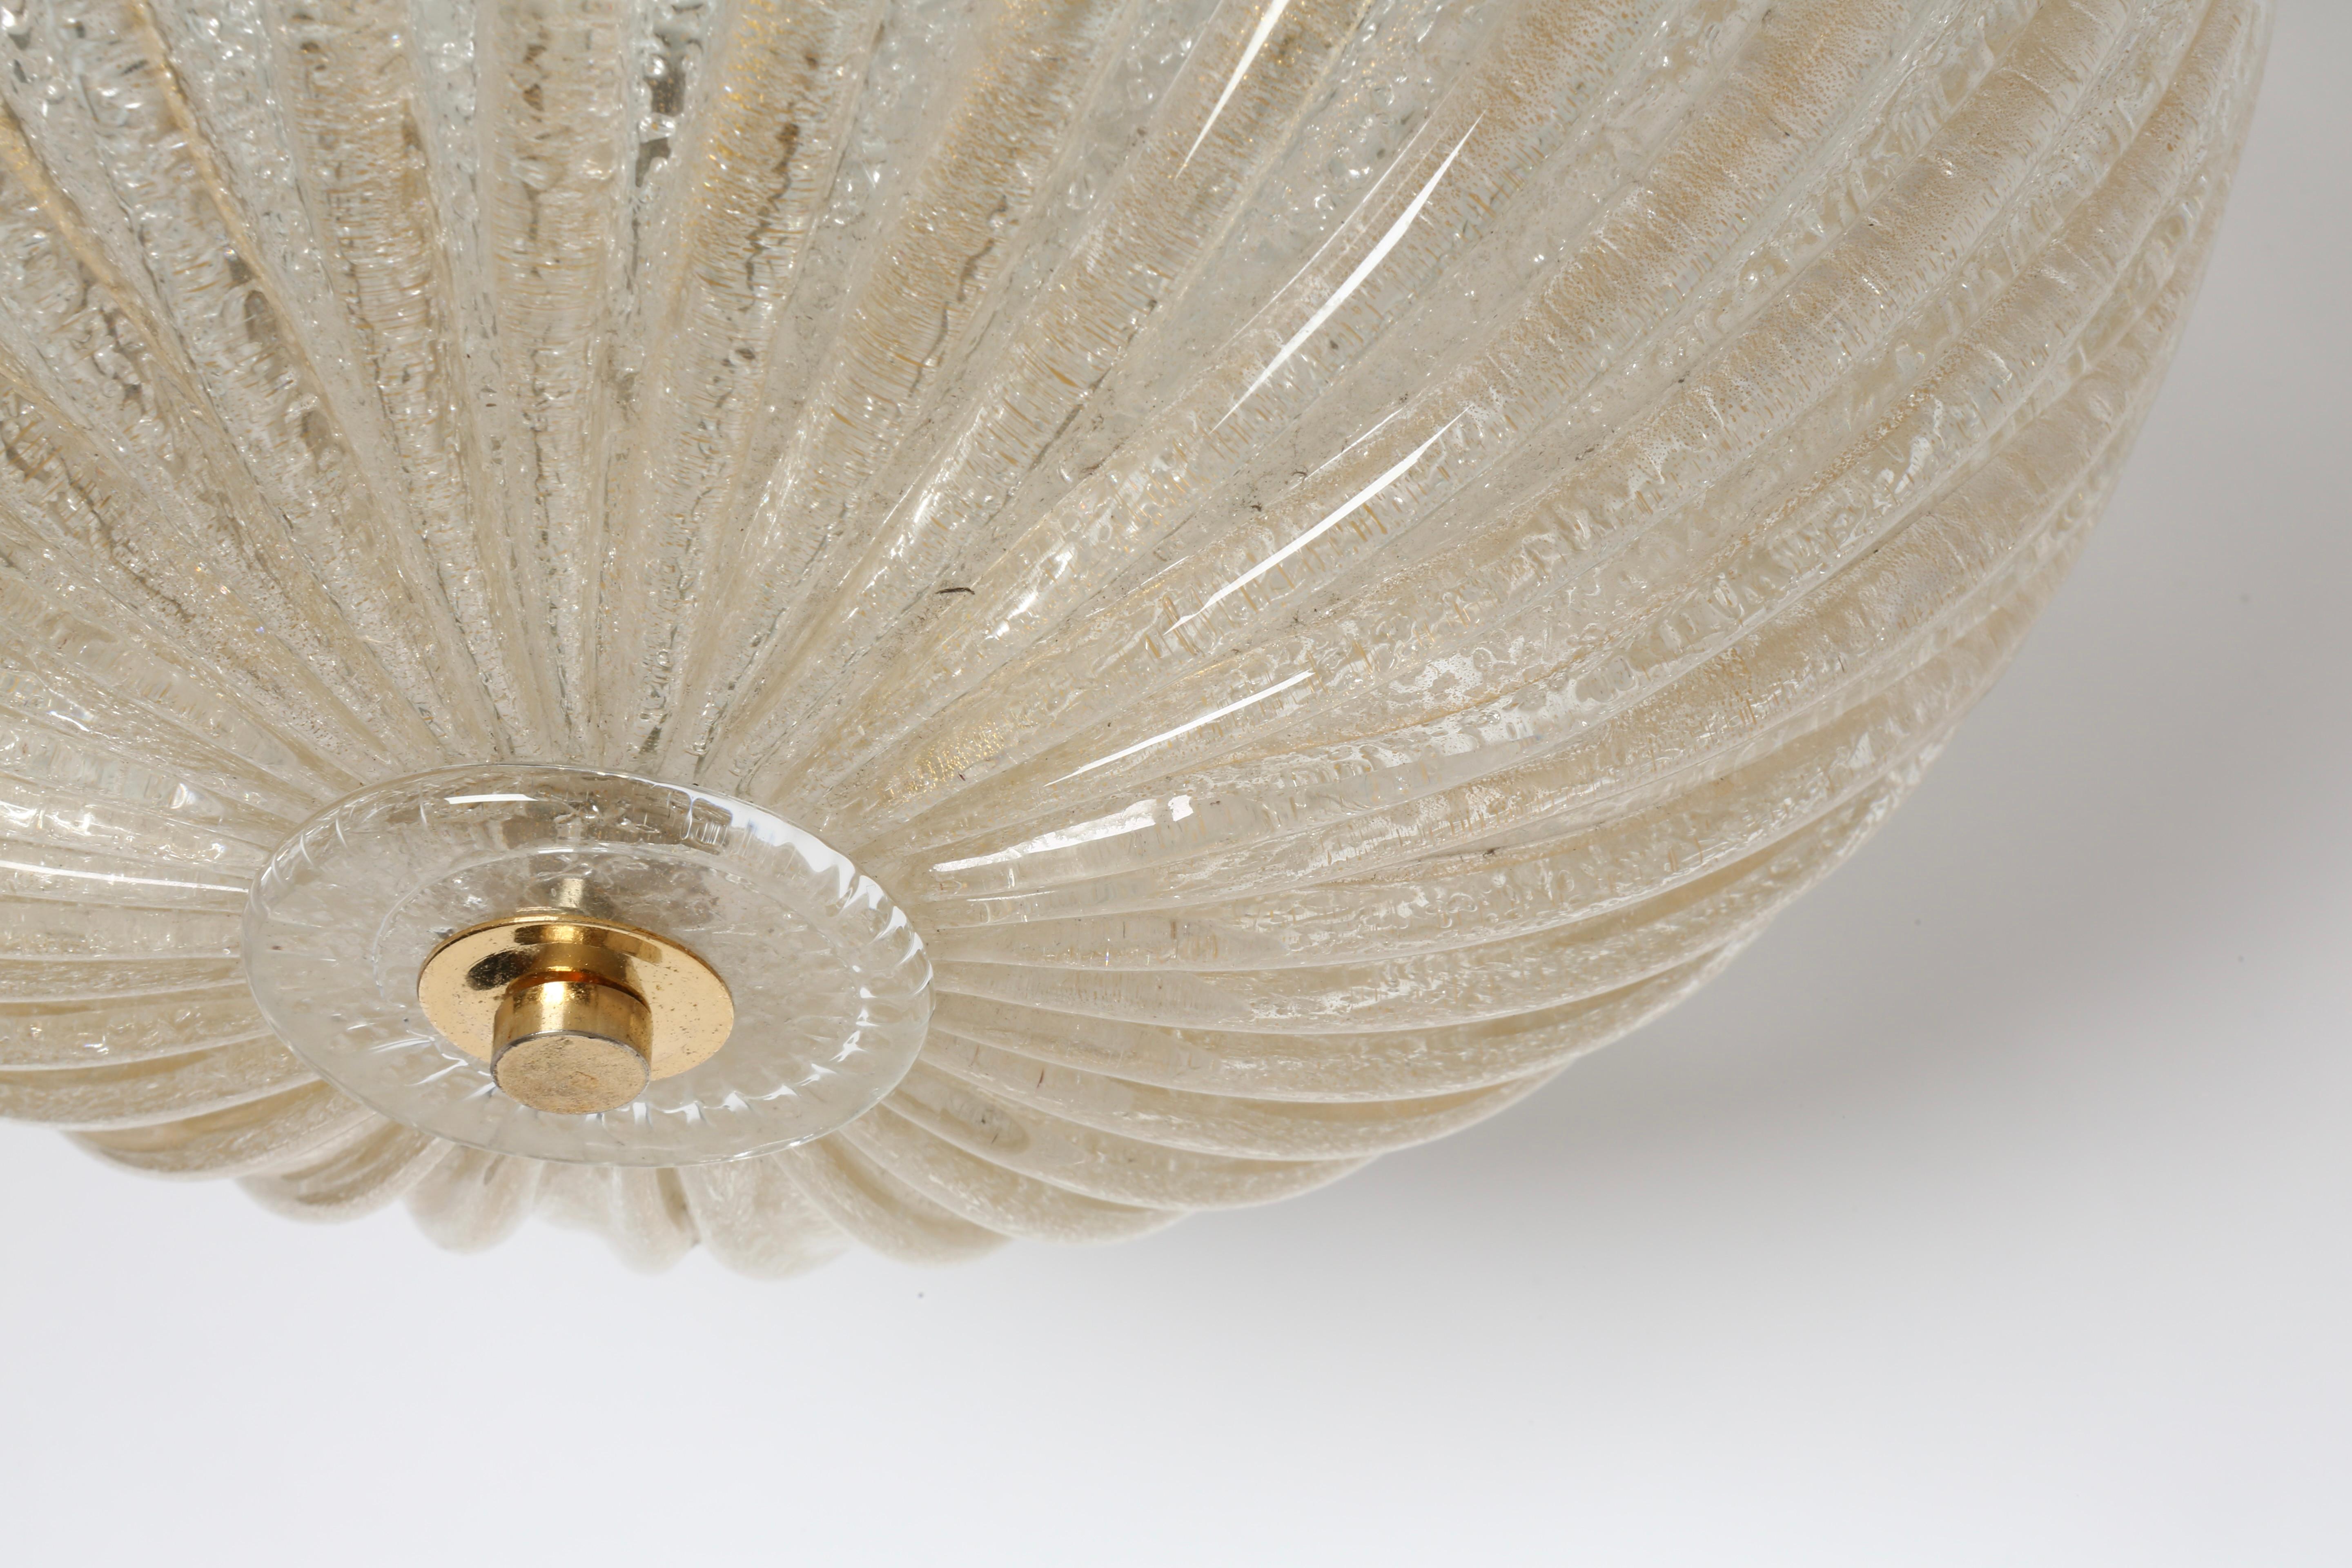 Mid-20th Century Murano Flush Mount Ceiling Light by Barovier & Toso For Sale